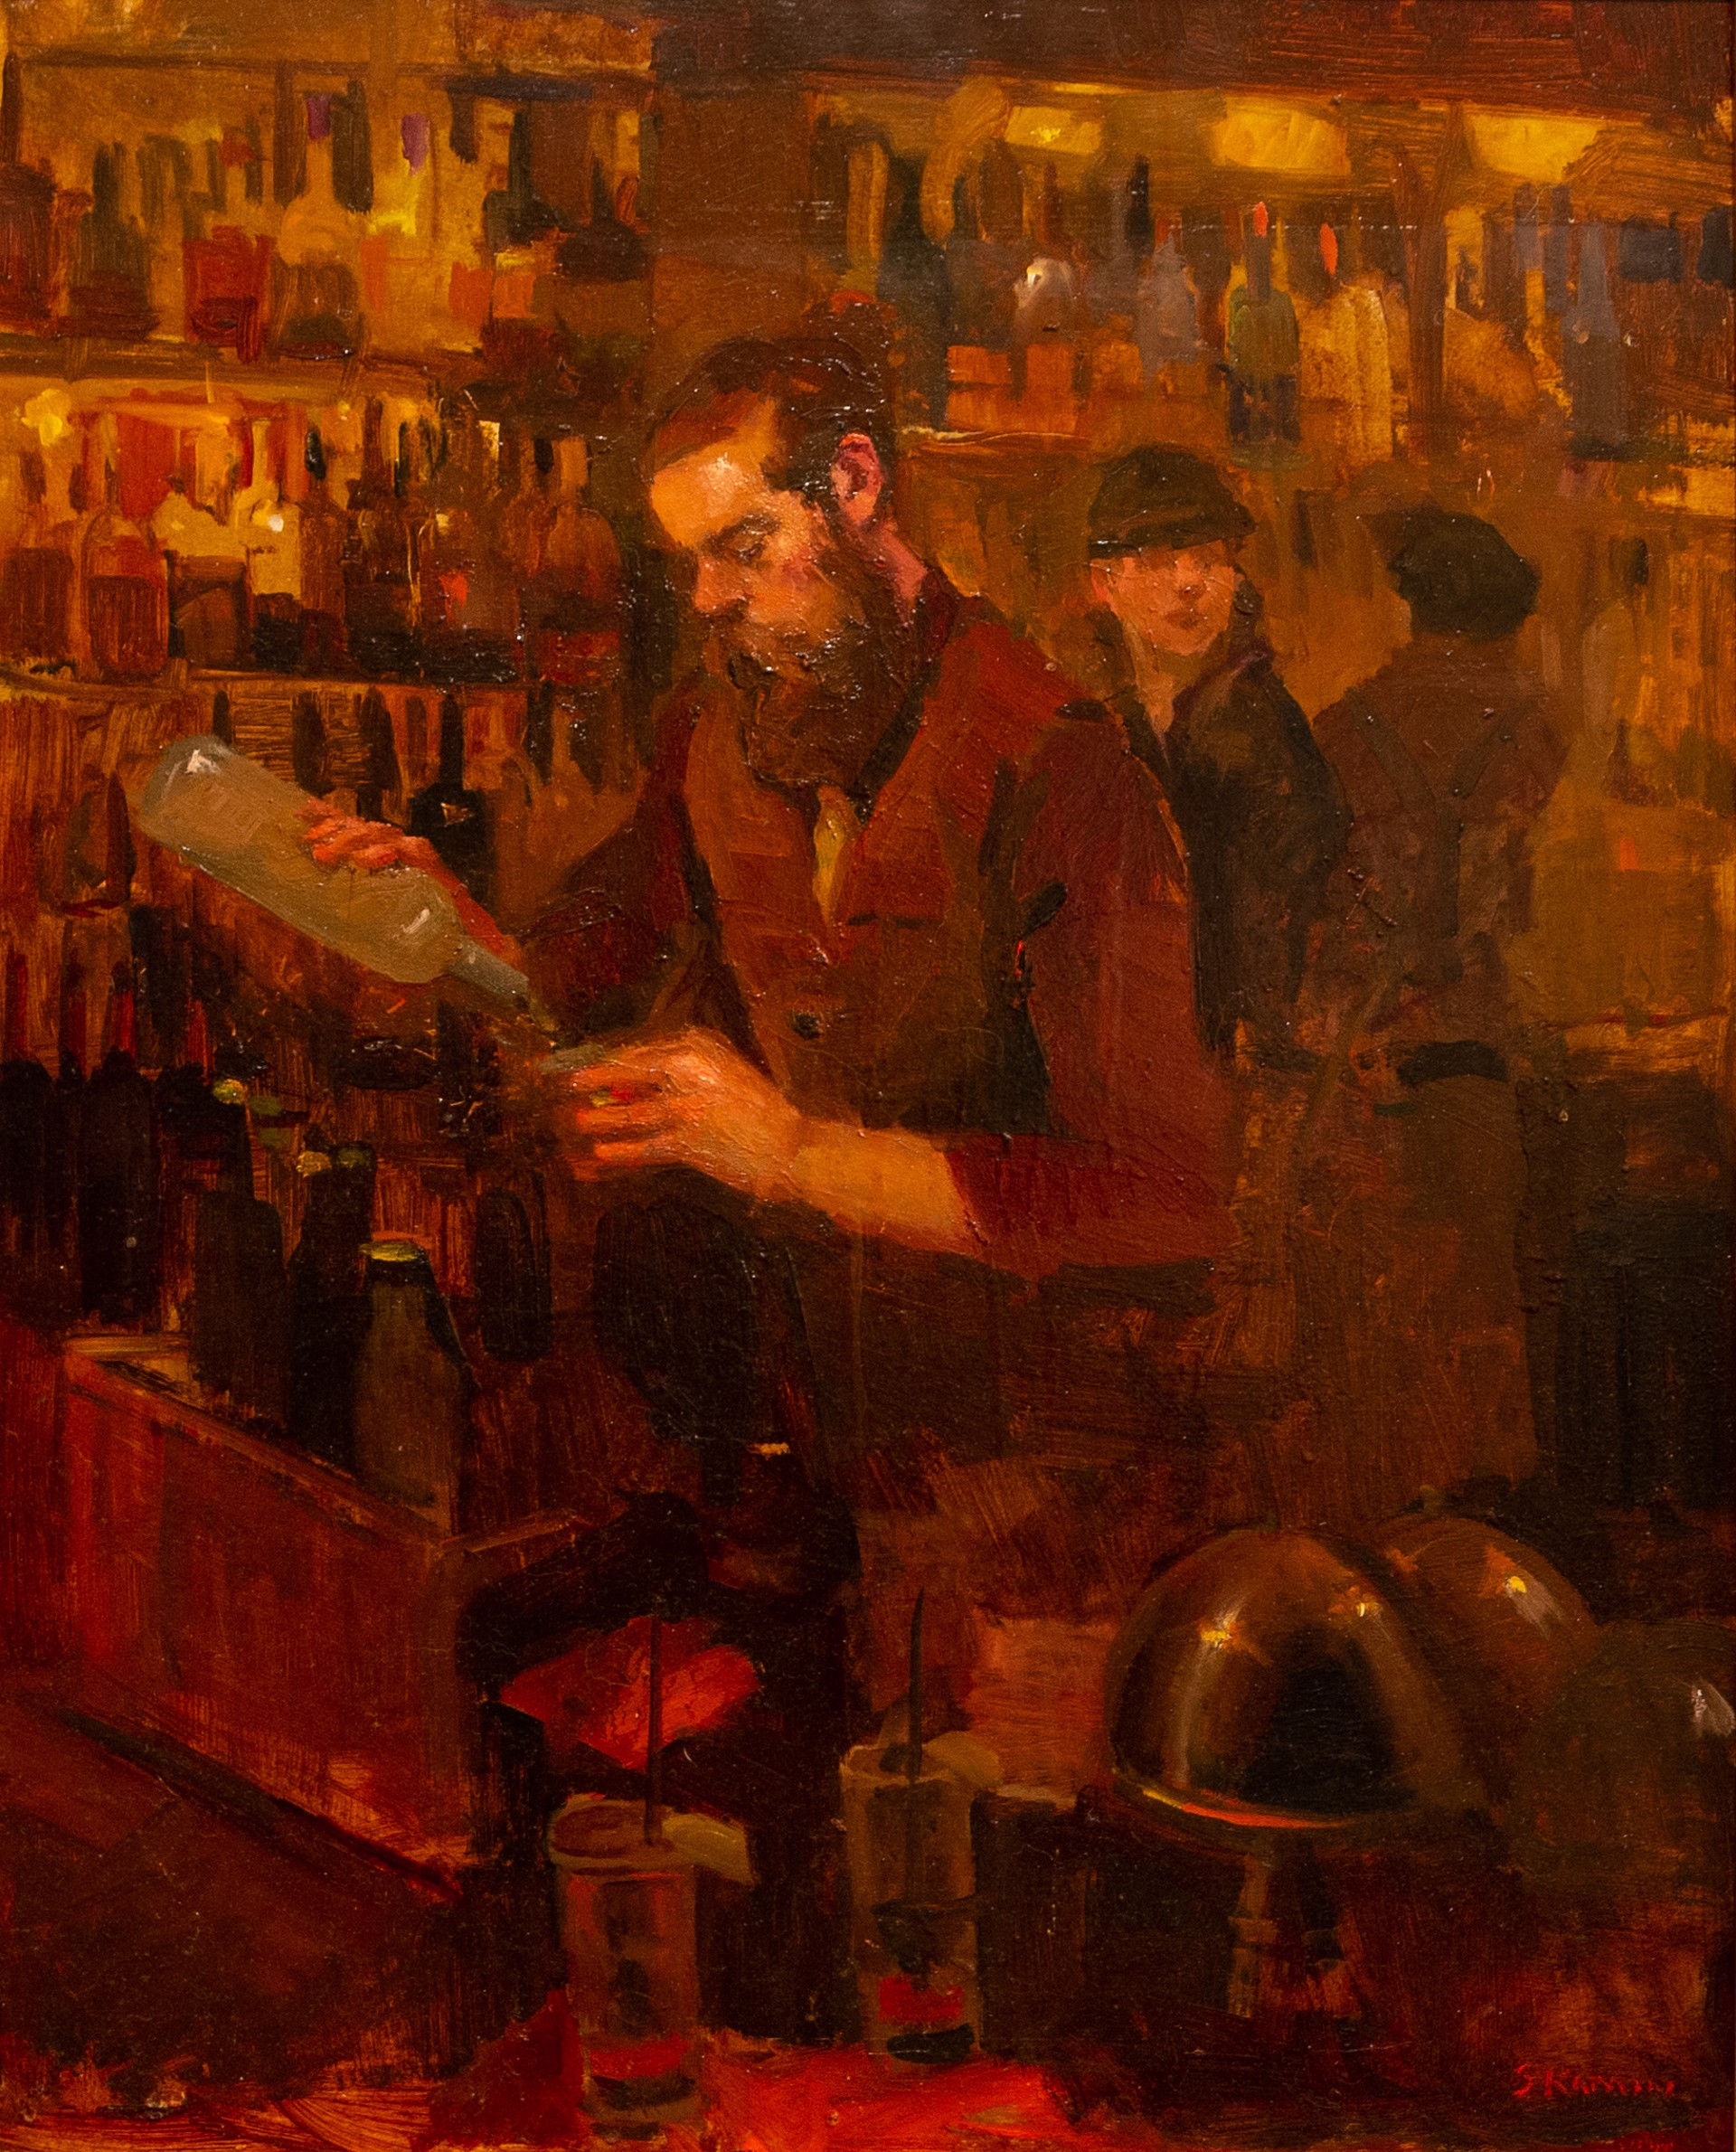 Bartender by Stacy Kamin